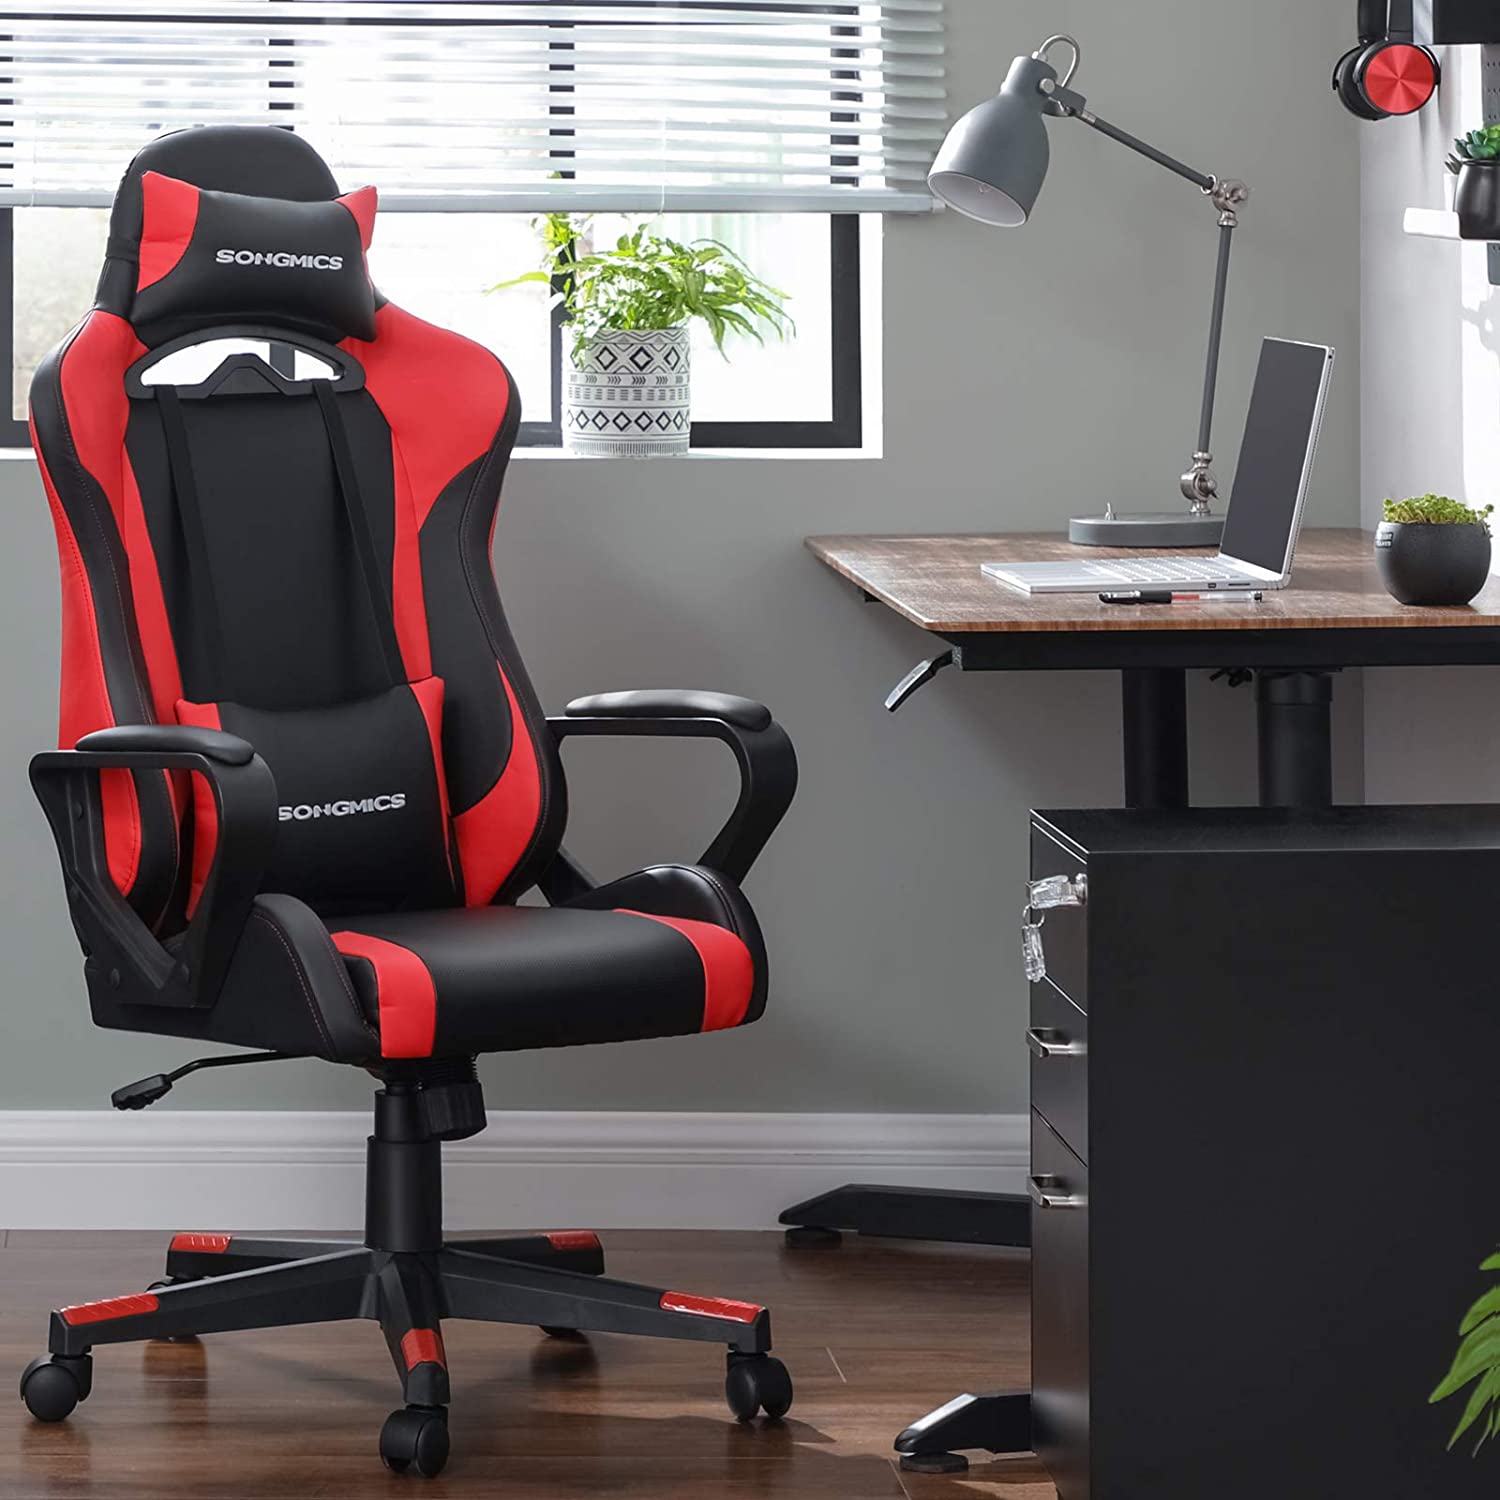 Nancy's Butcher Gaming chair - Office chair - Swivel chair - Lumbar cushion - Ergonomic - Height adjustable - Red - Black - Faux leather - 71 x 63 x (120-130)